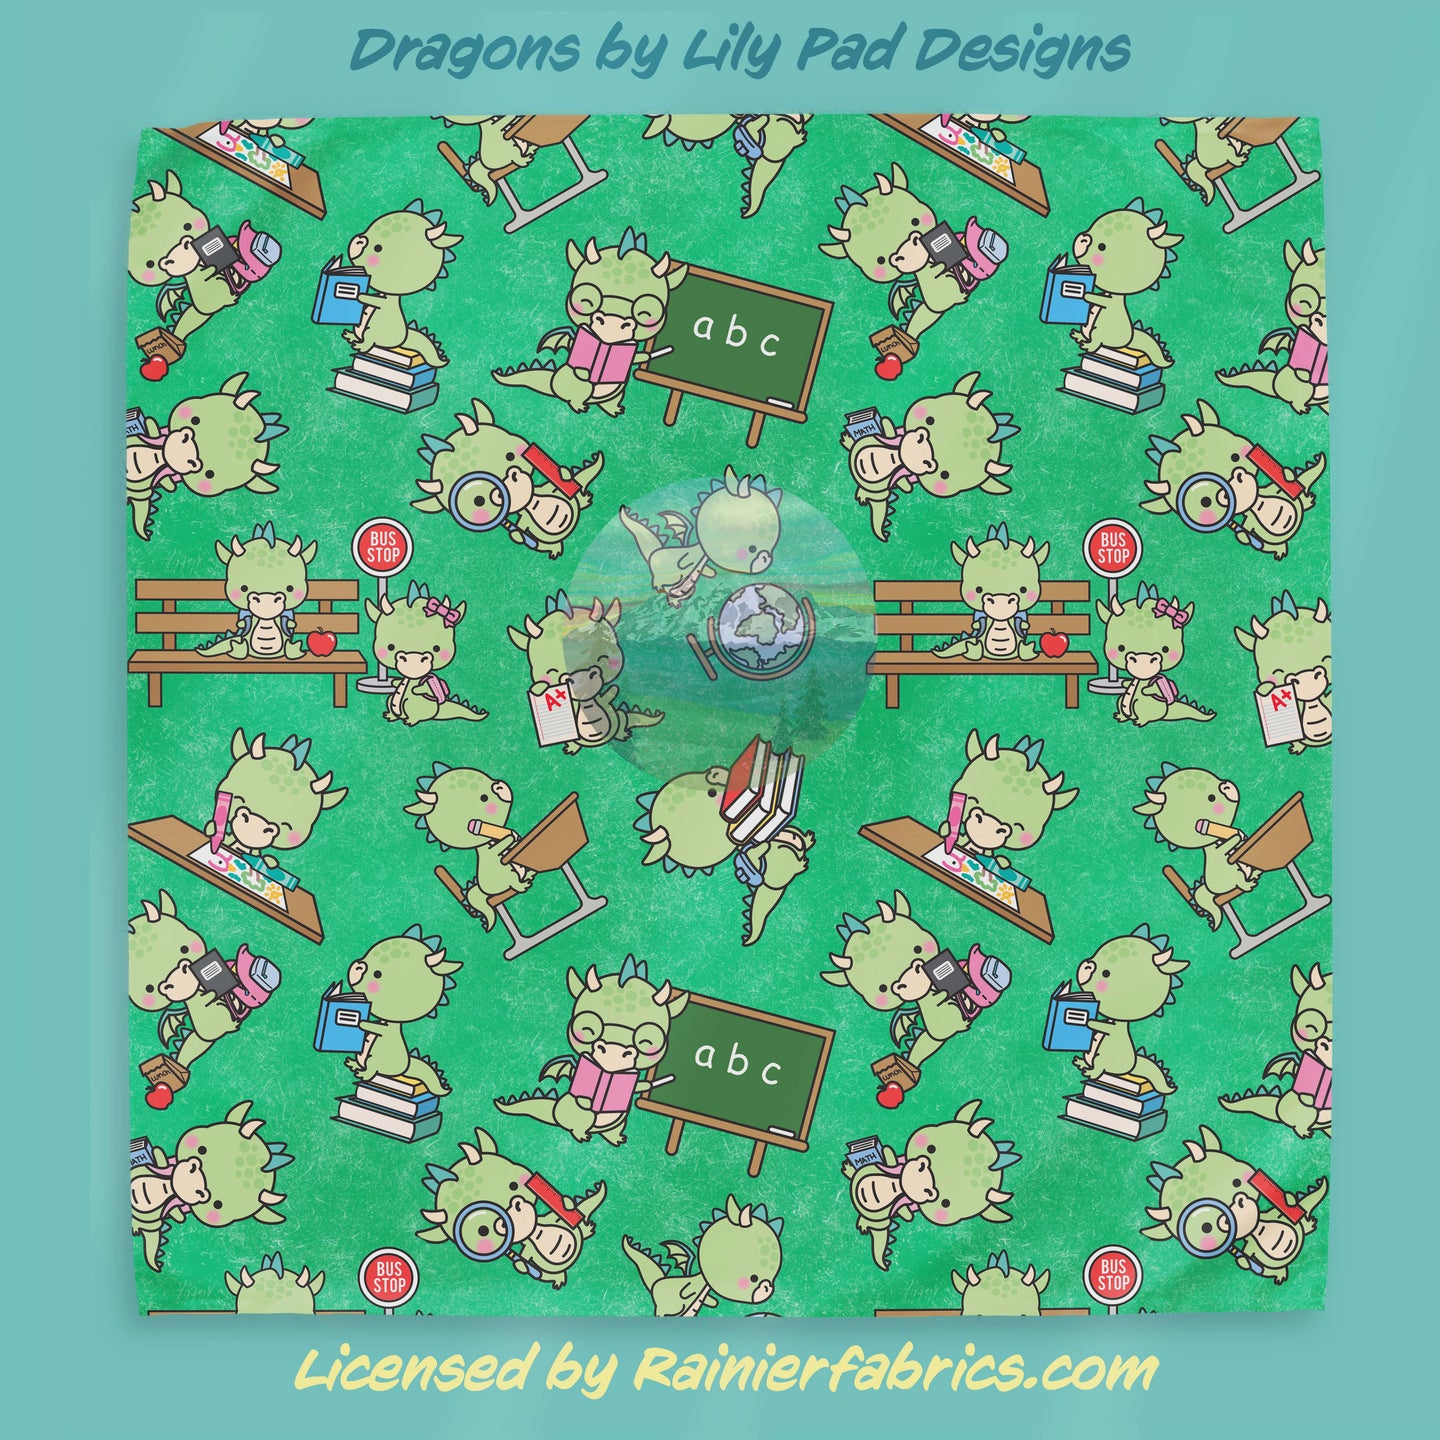 Dragons by Lylipad Designs - TAT 2-5 Business Days - Order in 1/2 yard increments